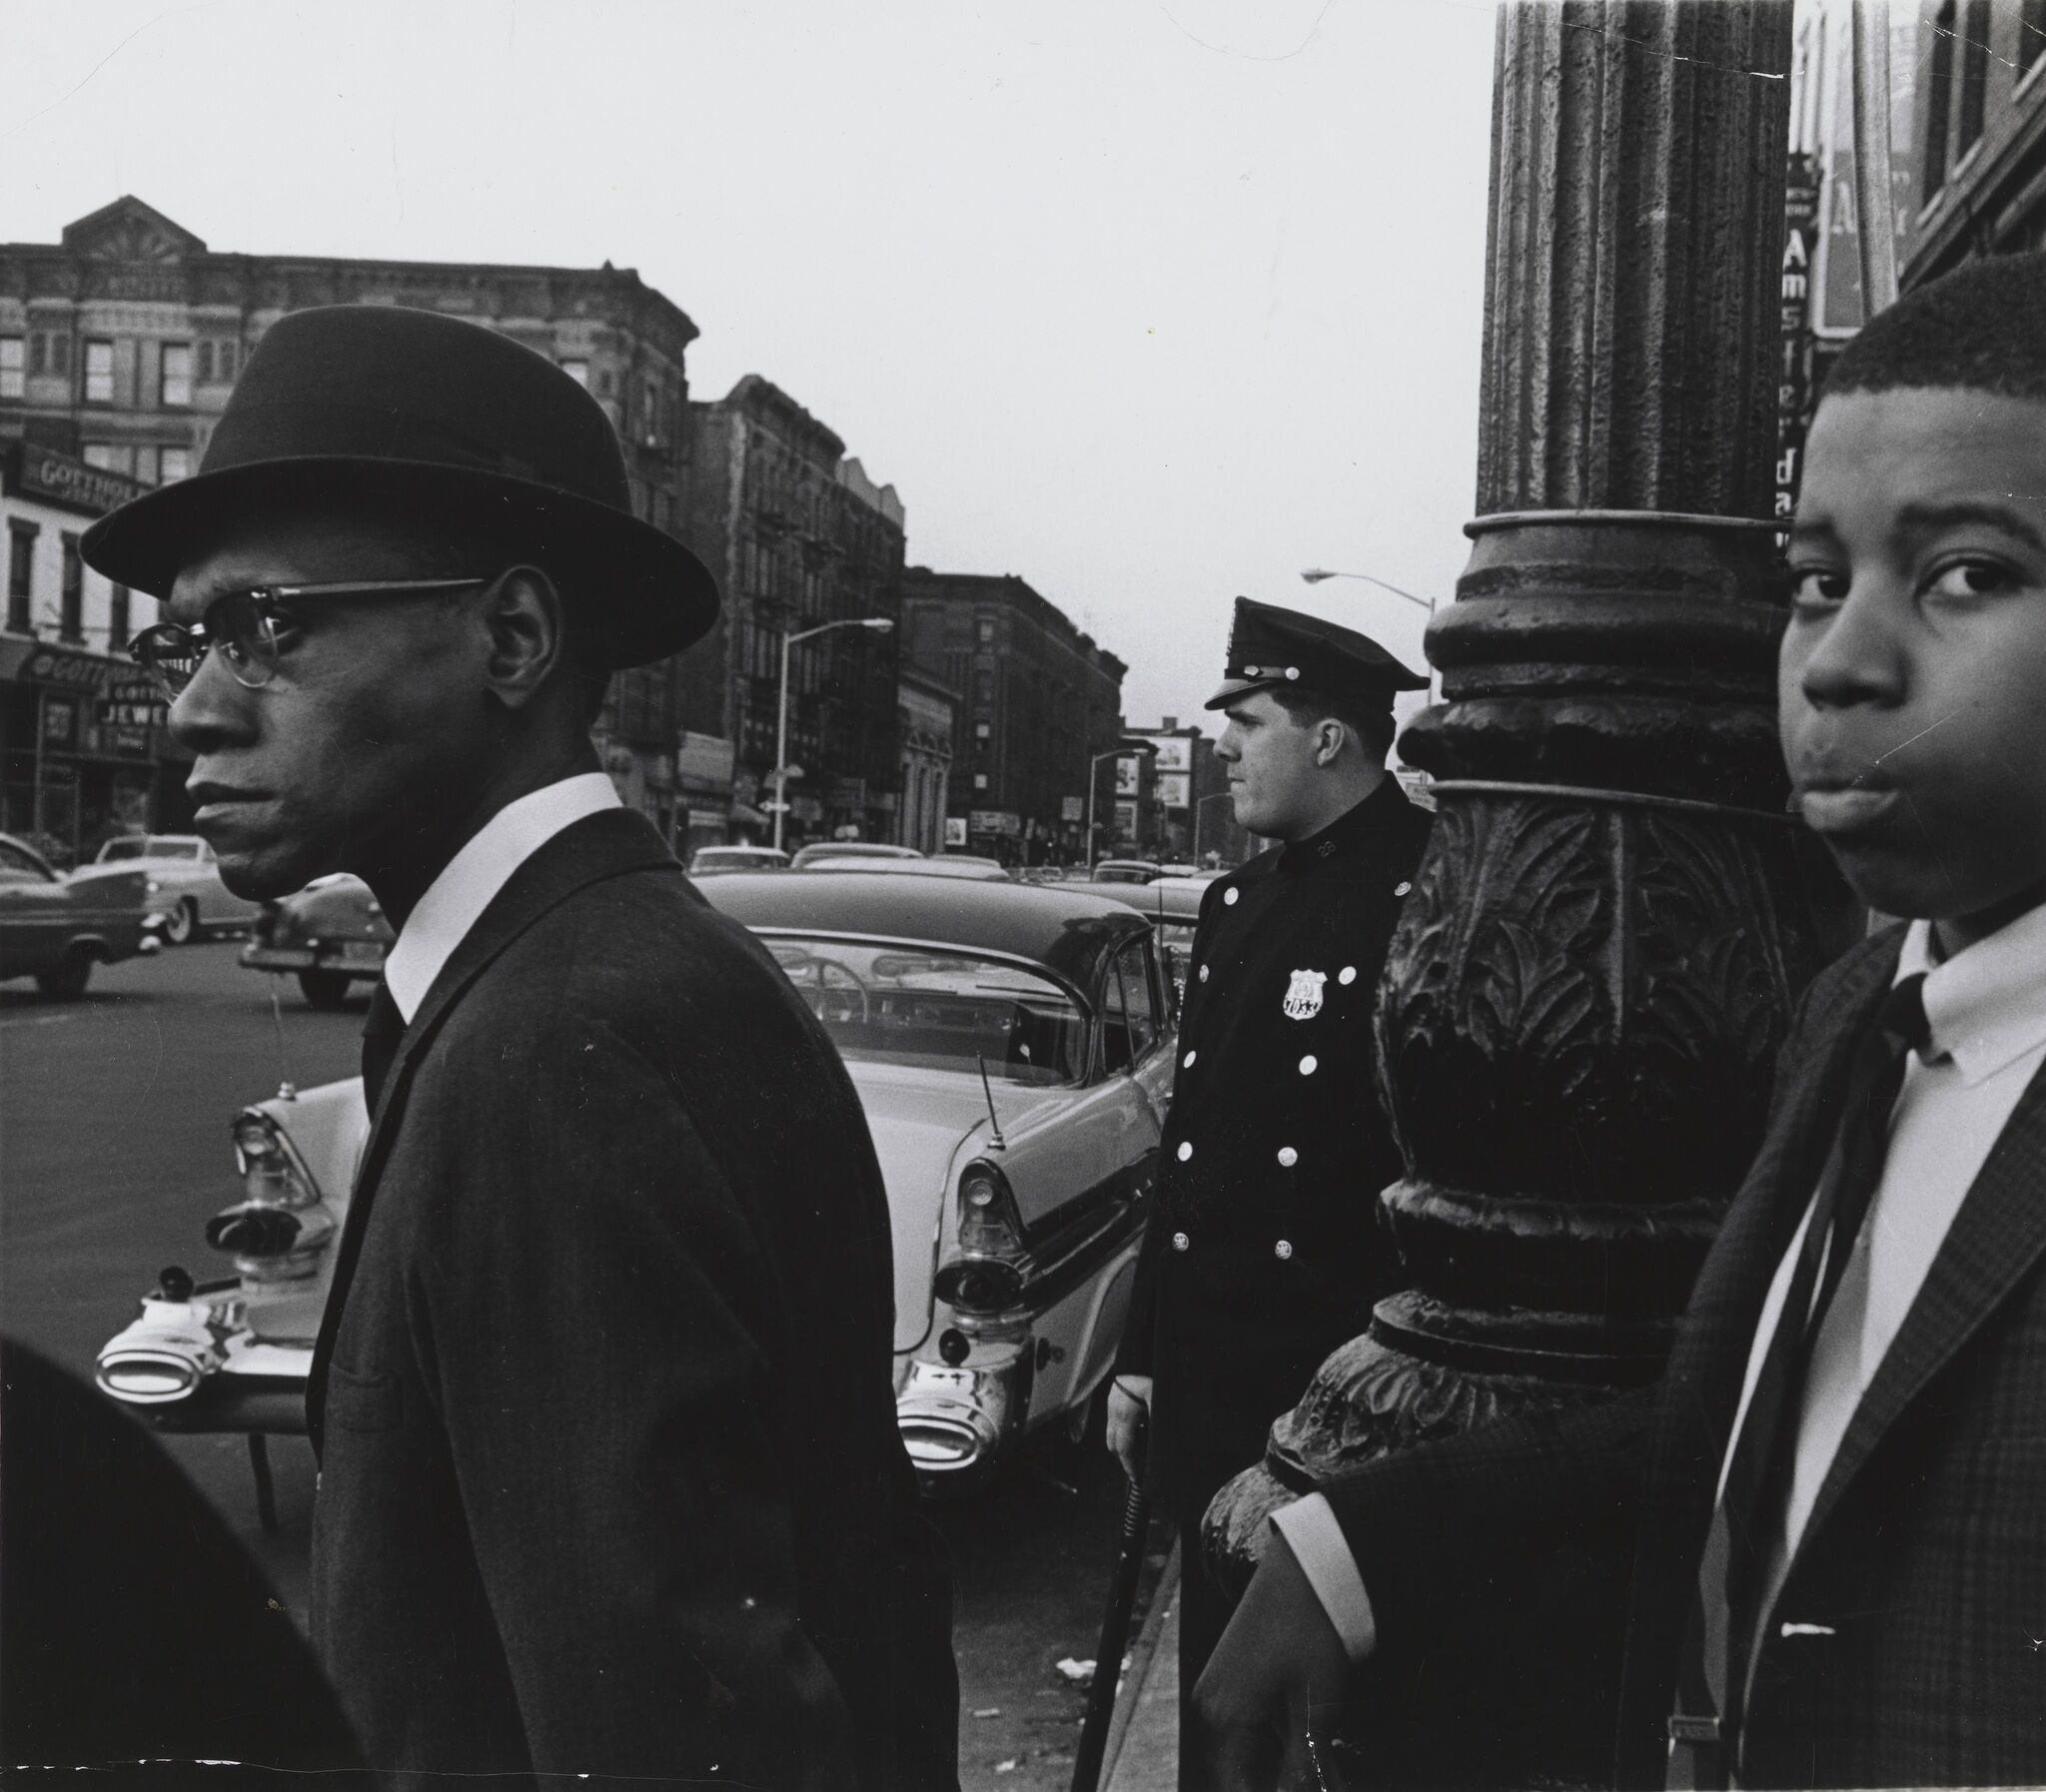 A black man and a young boy dressed in suits standing outside on a street with a white man in uniform standing nearby.